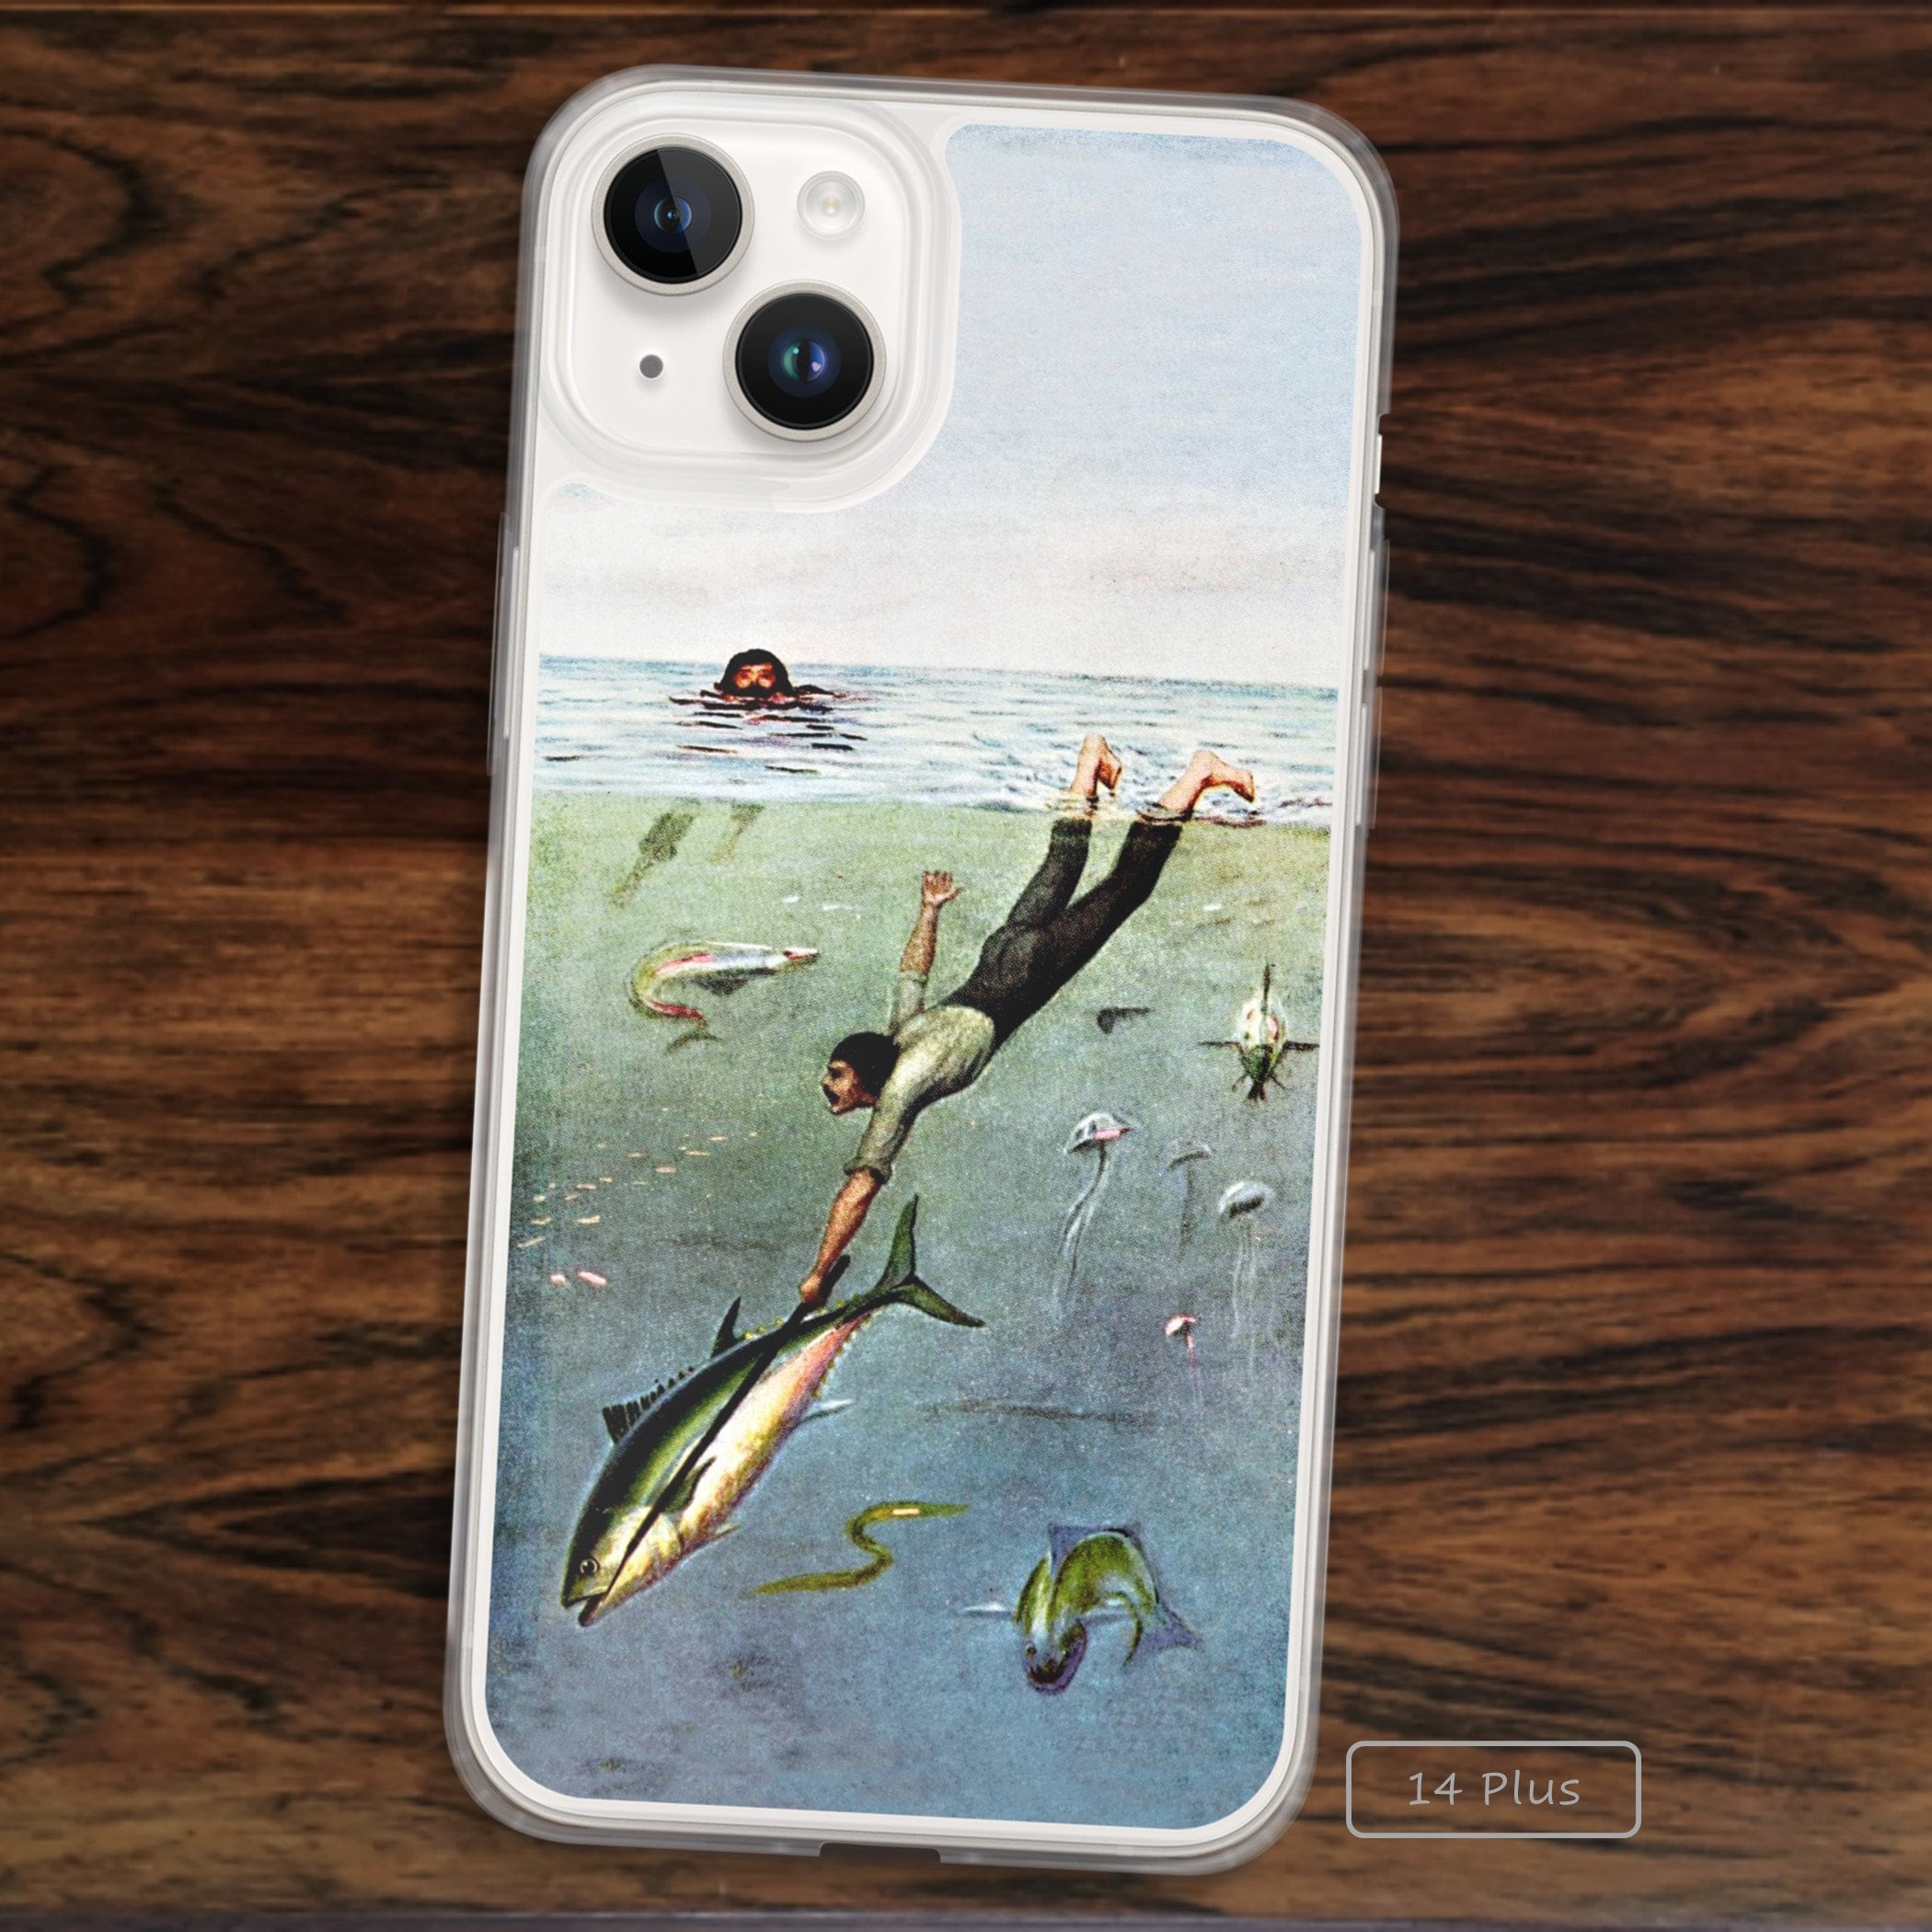 Quirky iPhone Case With Unusual Ocean Drawing of Man Fishing and